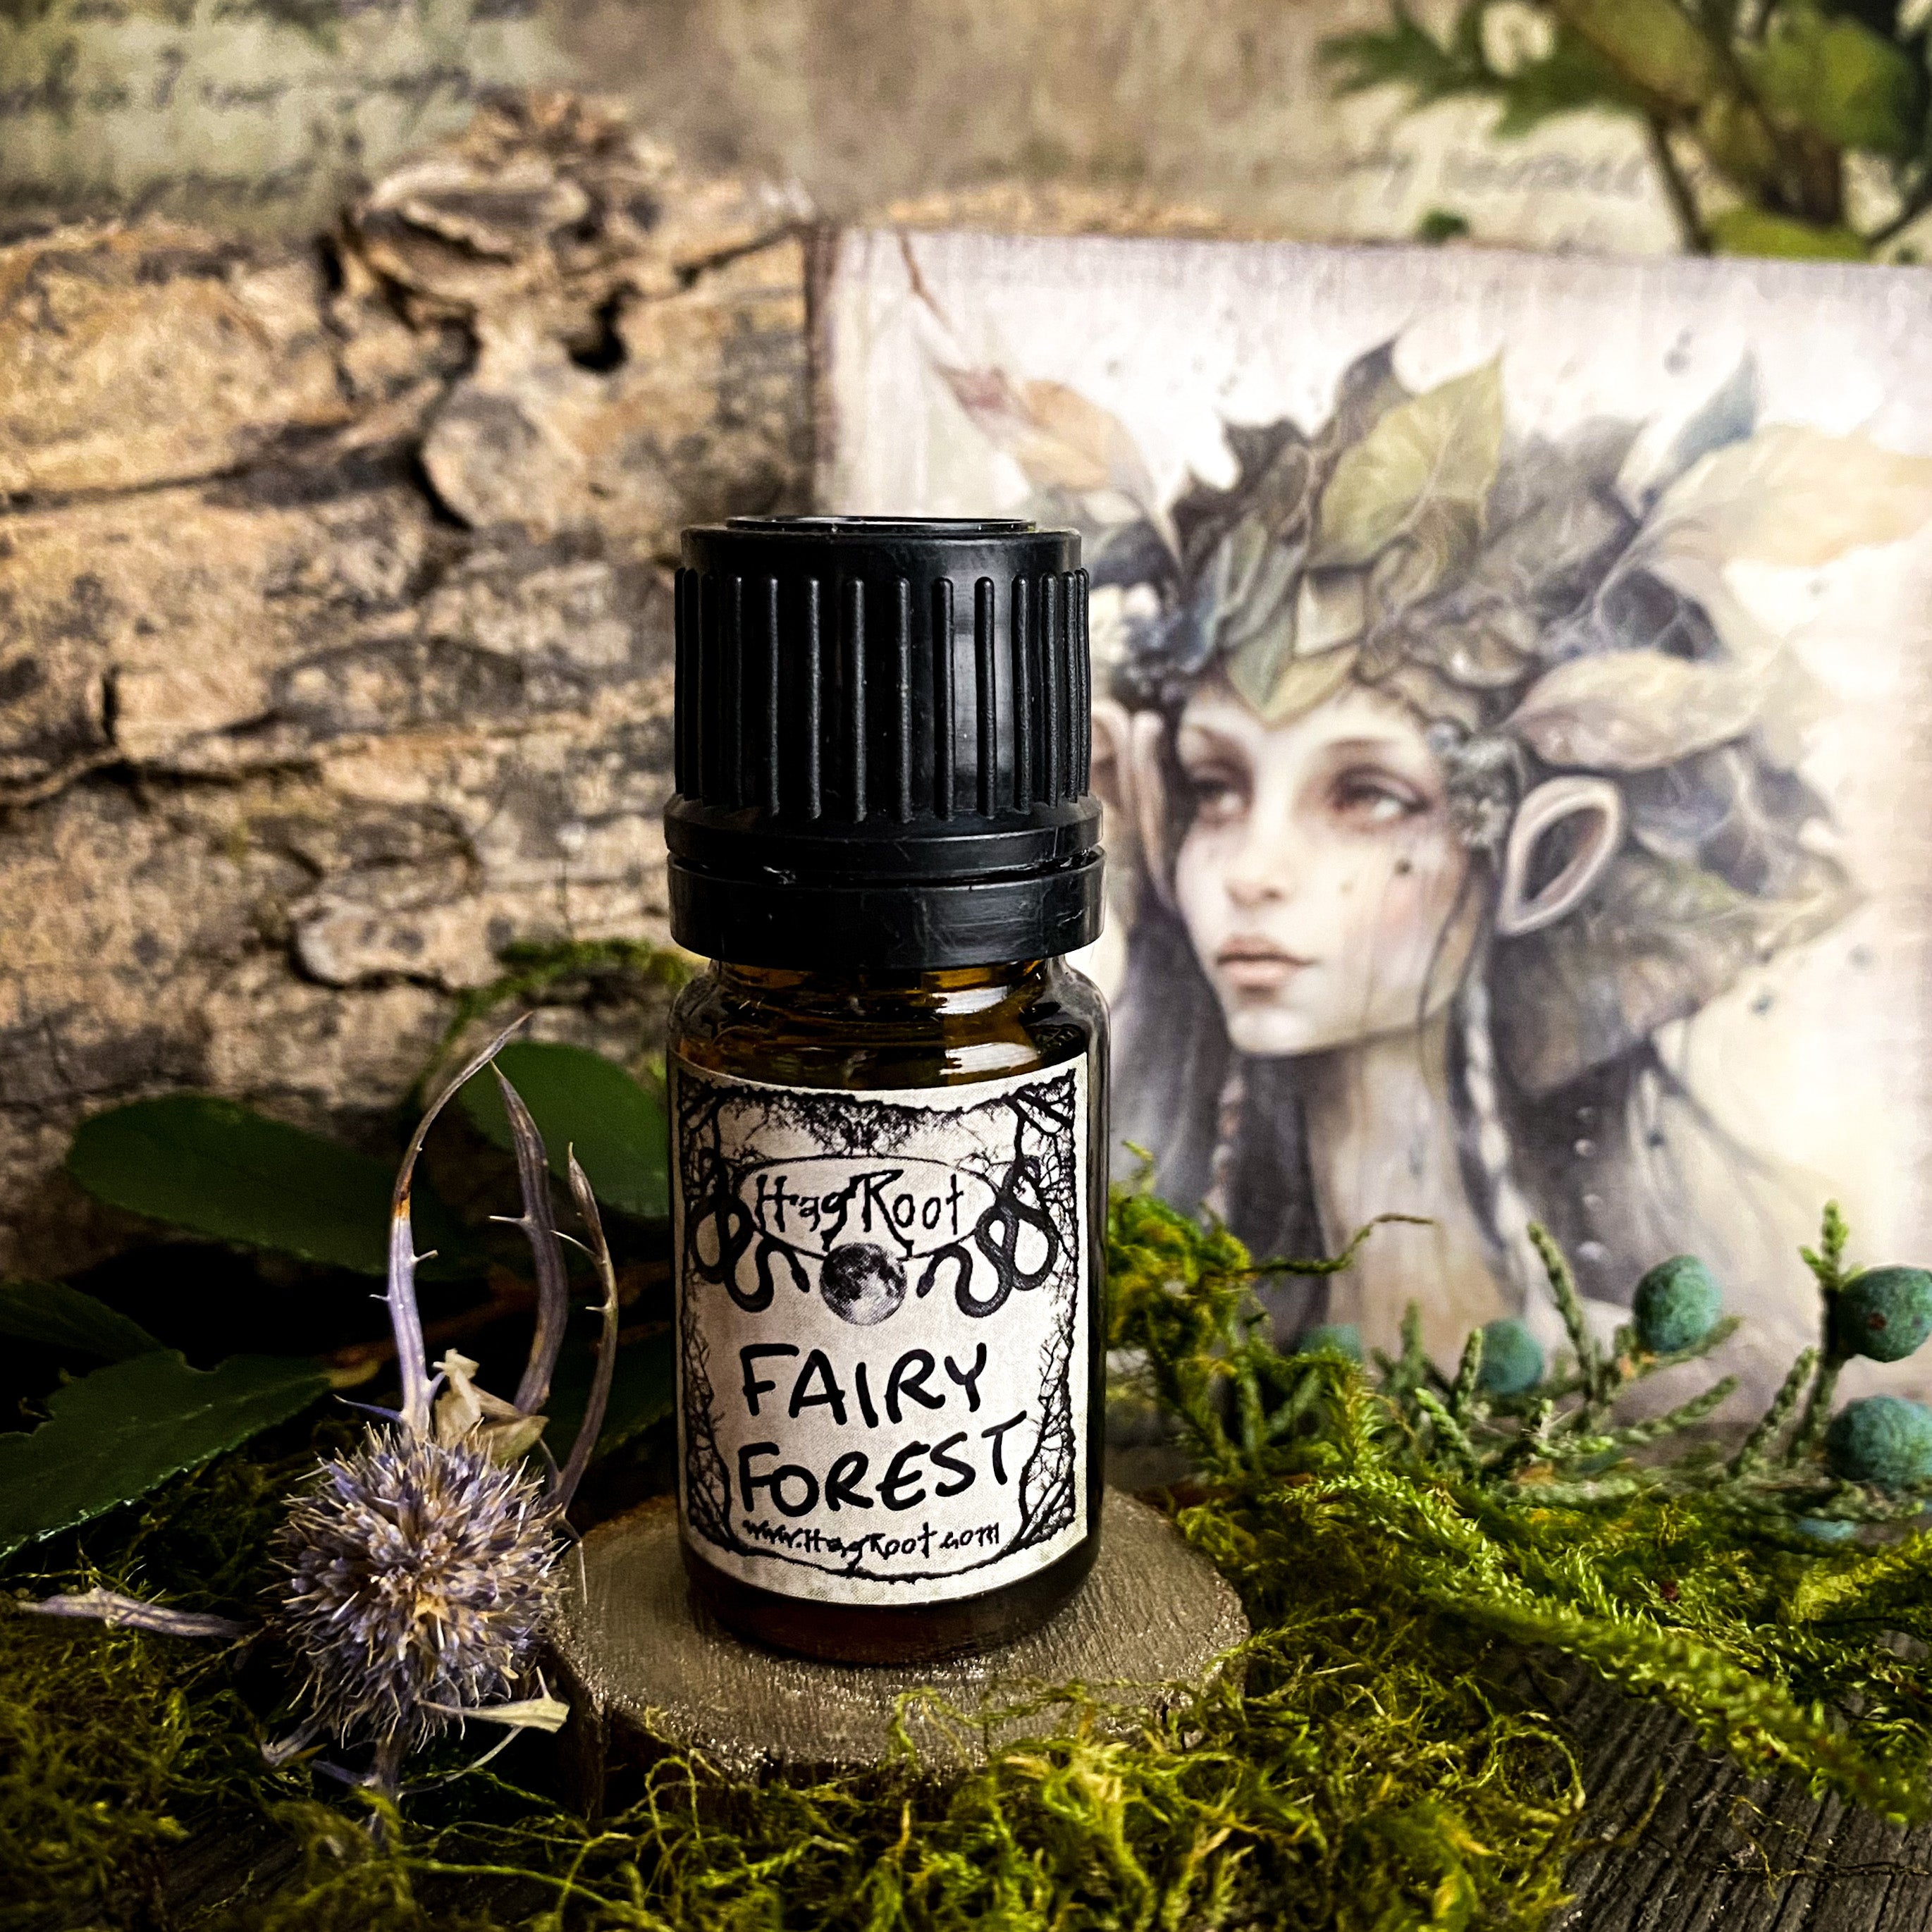 FAIRY FOREST-(Birch, Hyssop, Moss, Hawthorn Berry, Clove, Blackberry)-Perfume, Cologne, Anointing, Ritual Oil